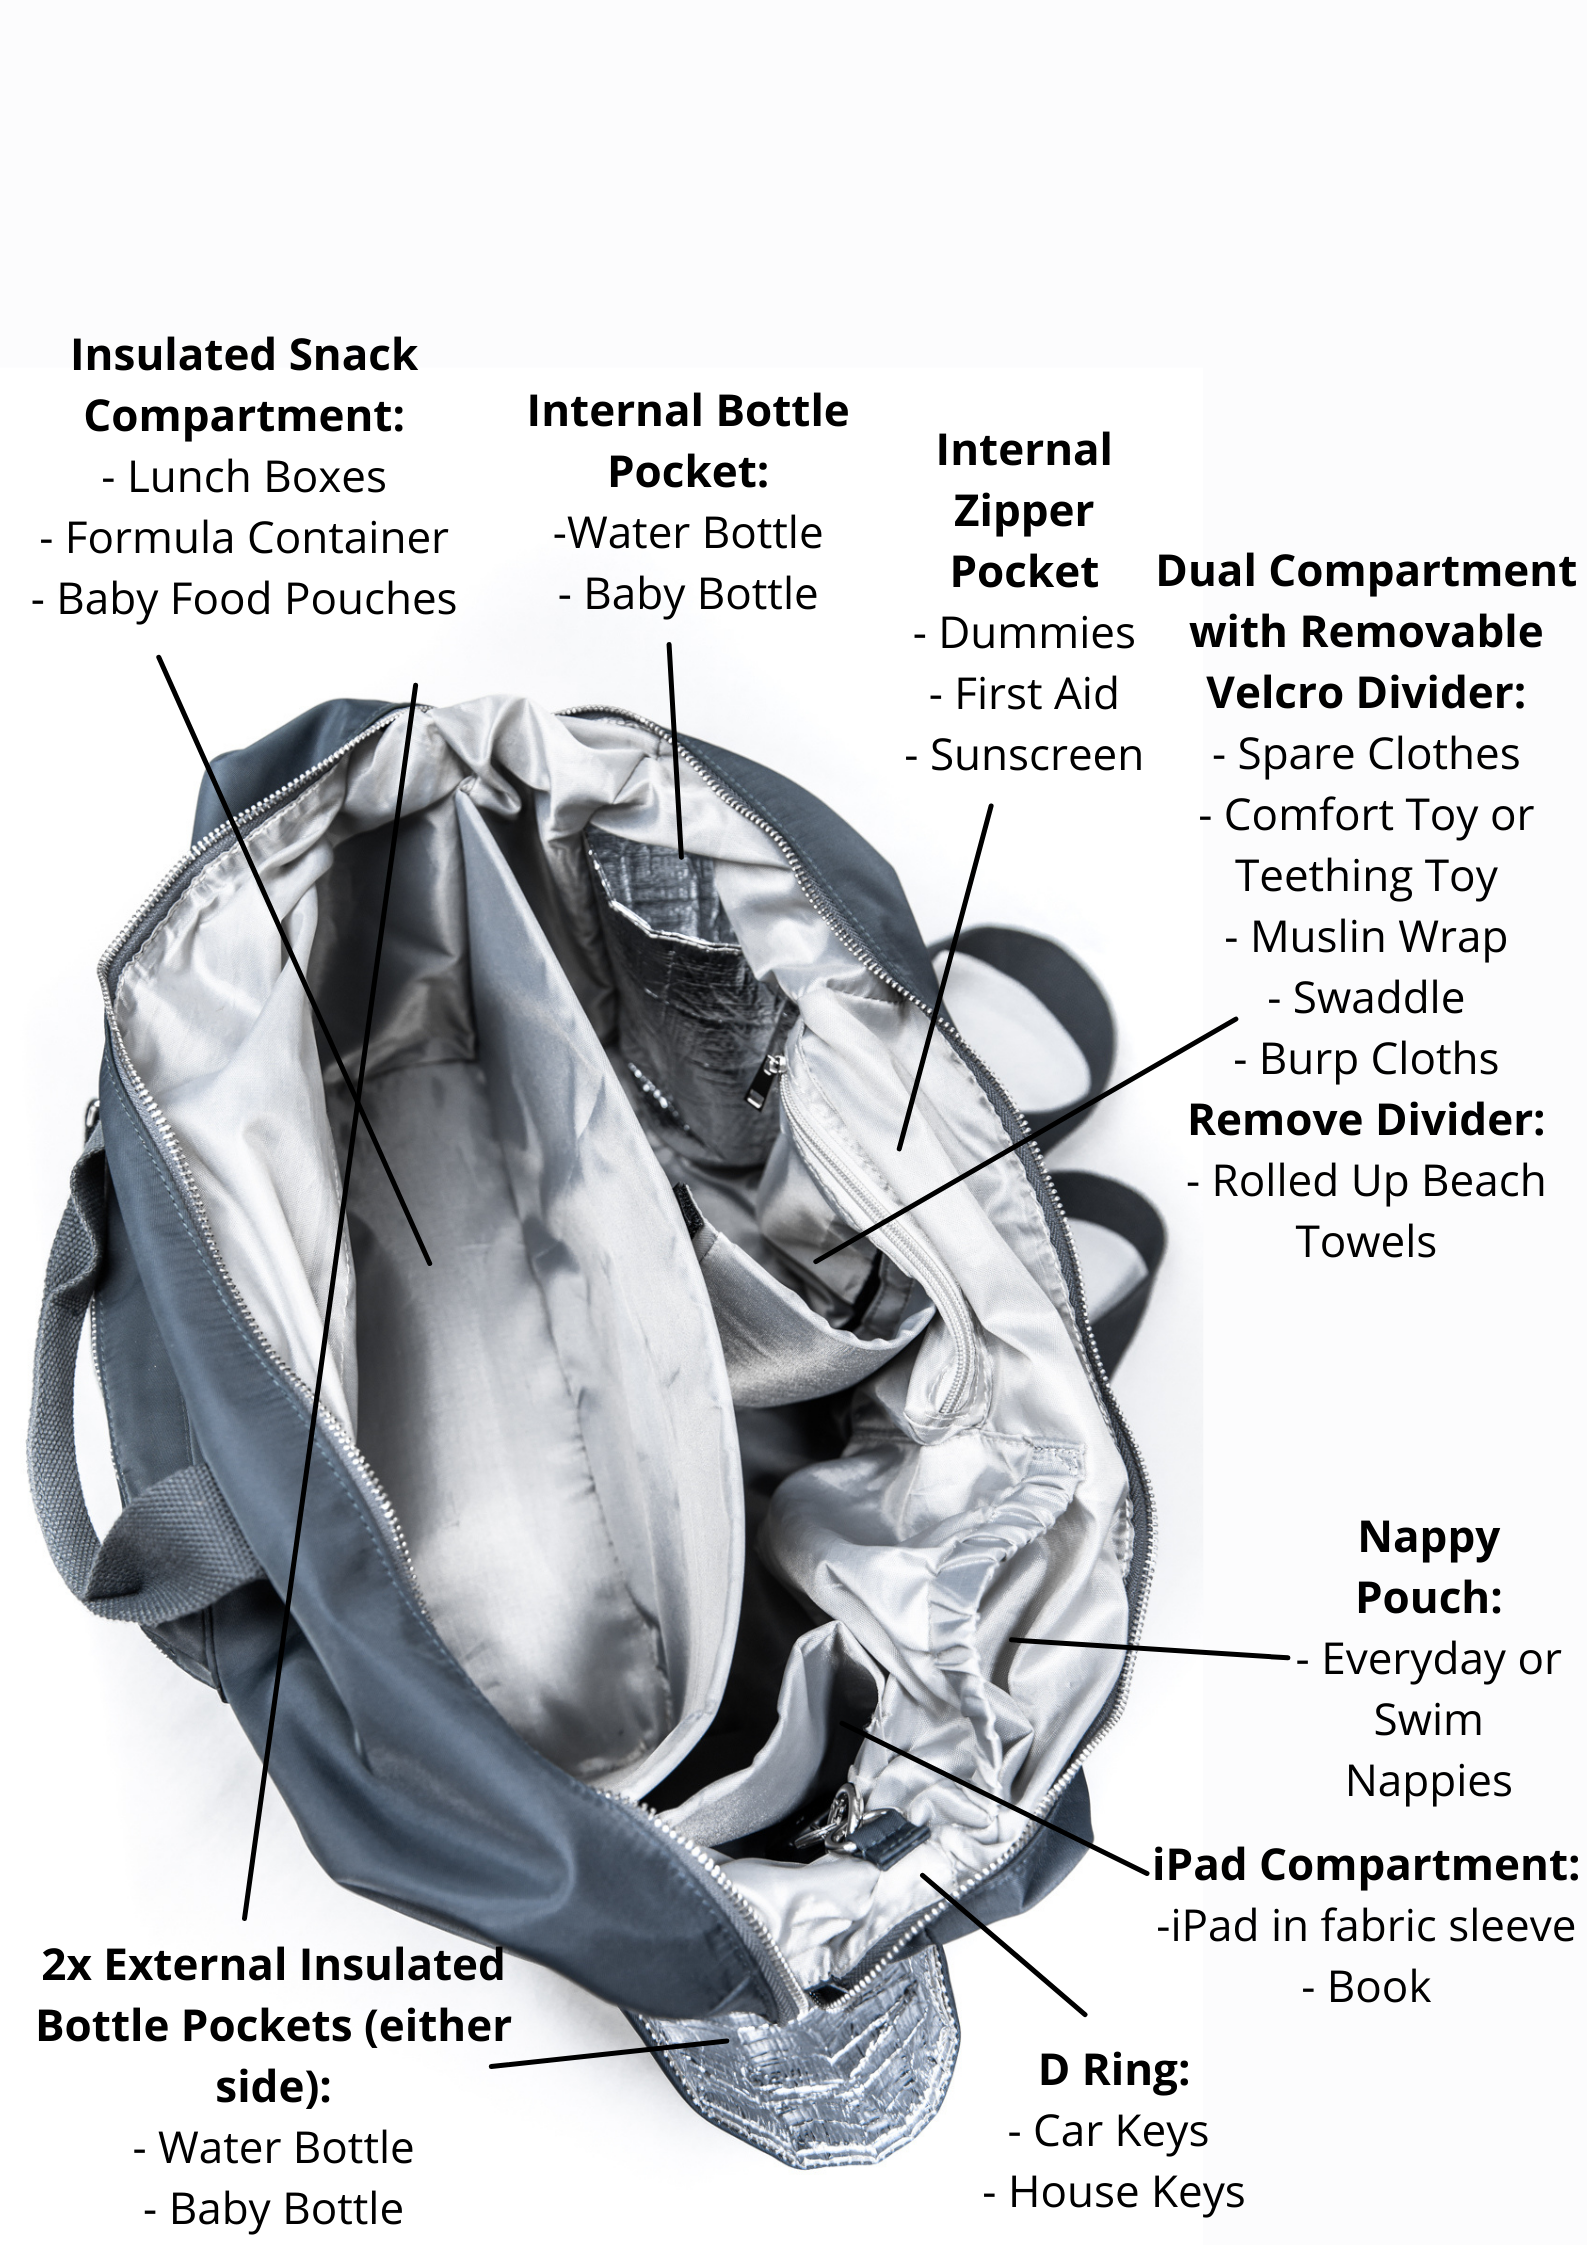 alt="Inside The DUFFLE All In One Nappy Bag compartments"